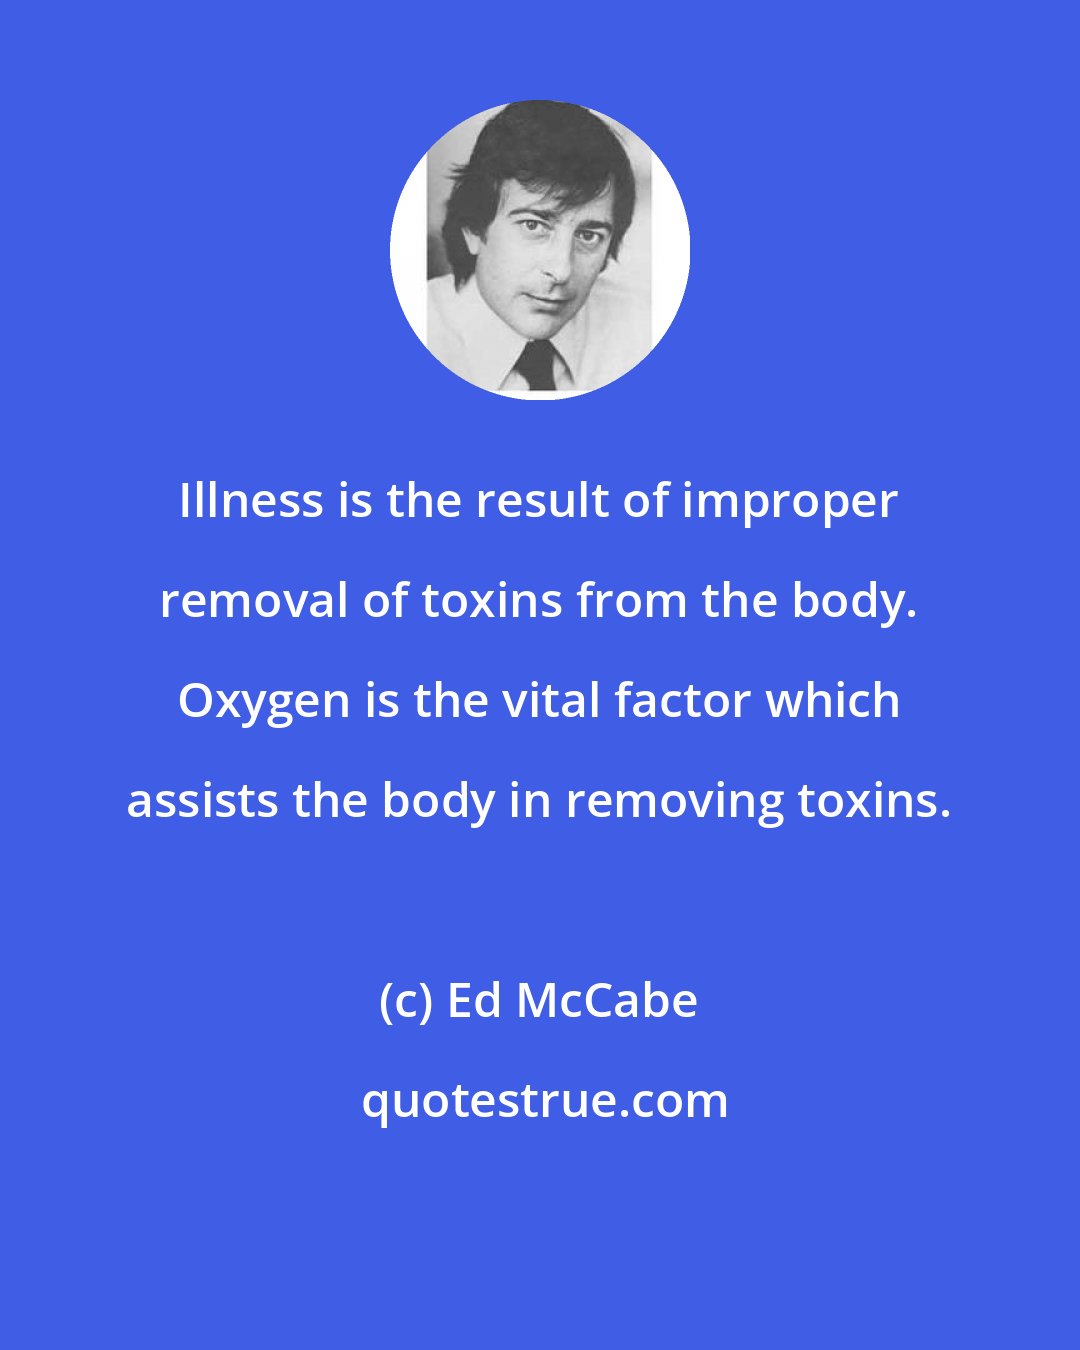 Ed McCabe: Illness is the result of improper removal of toxins from the body. Oxygen is the vital factor which assists the body in removing toxins.